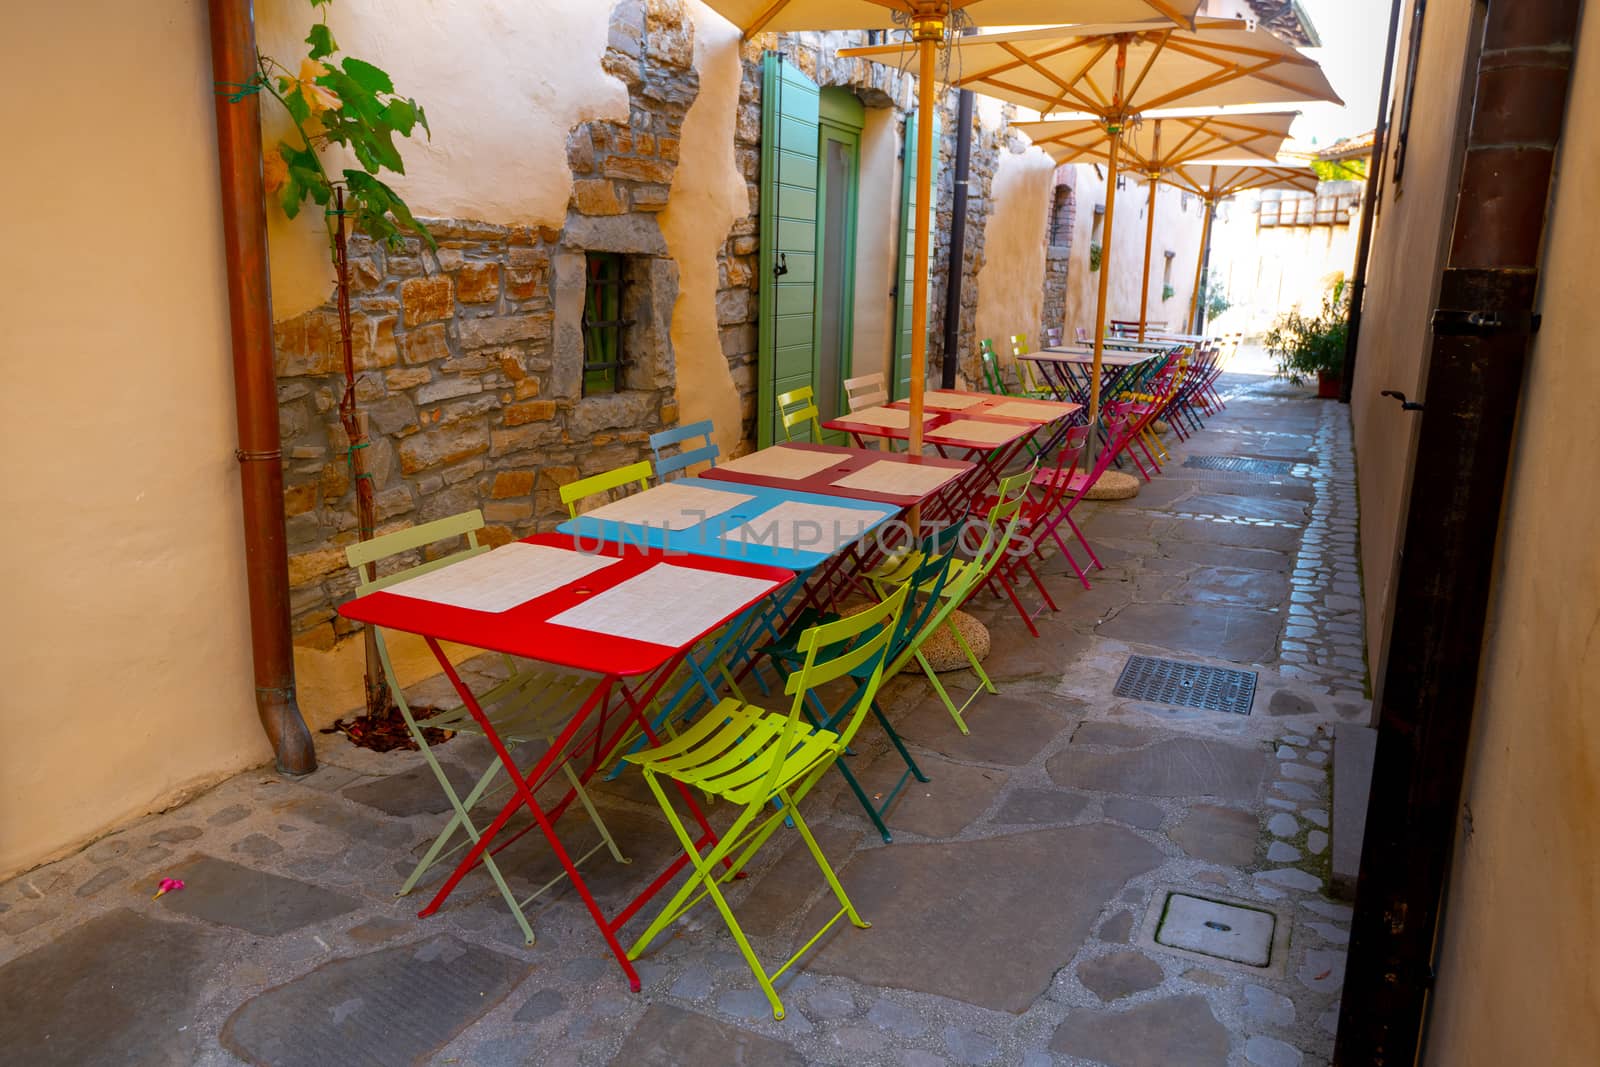 Small caffee, restaurant in narrow street in a medieval town with colorful tables and chairs, nobody, empty, umbrellas for shade